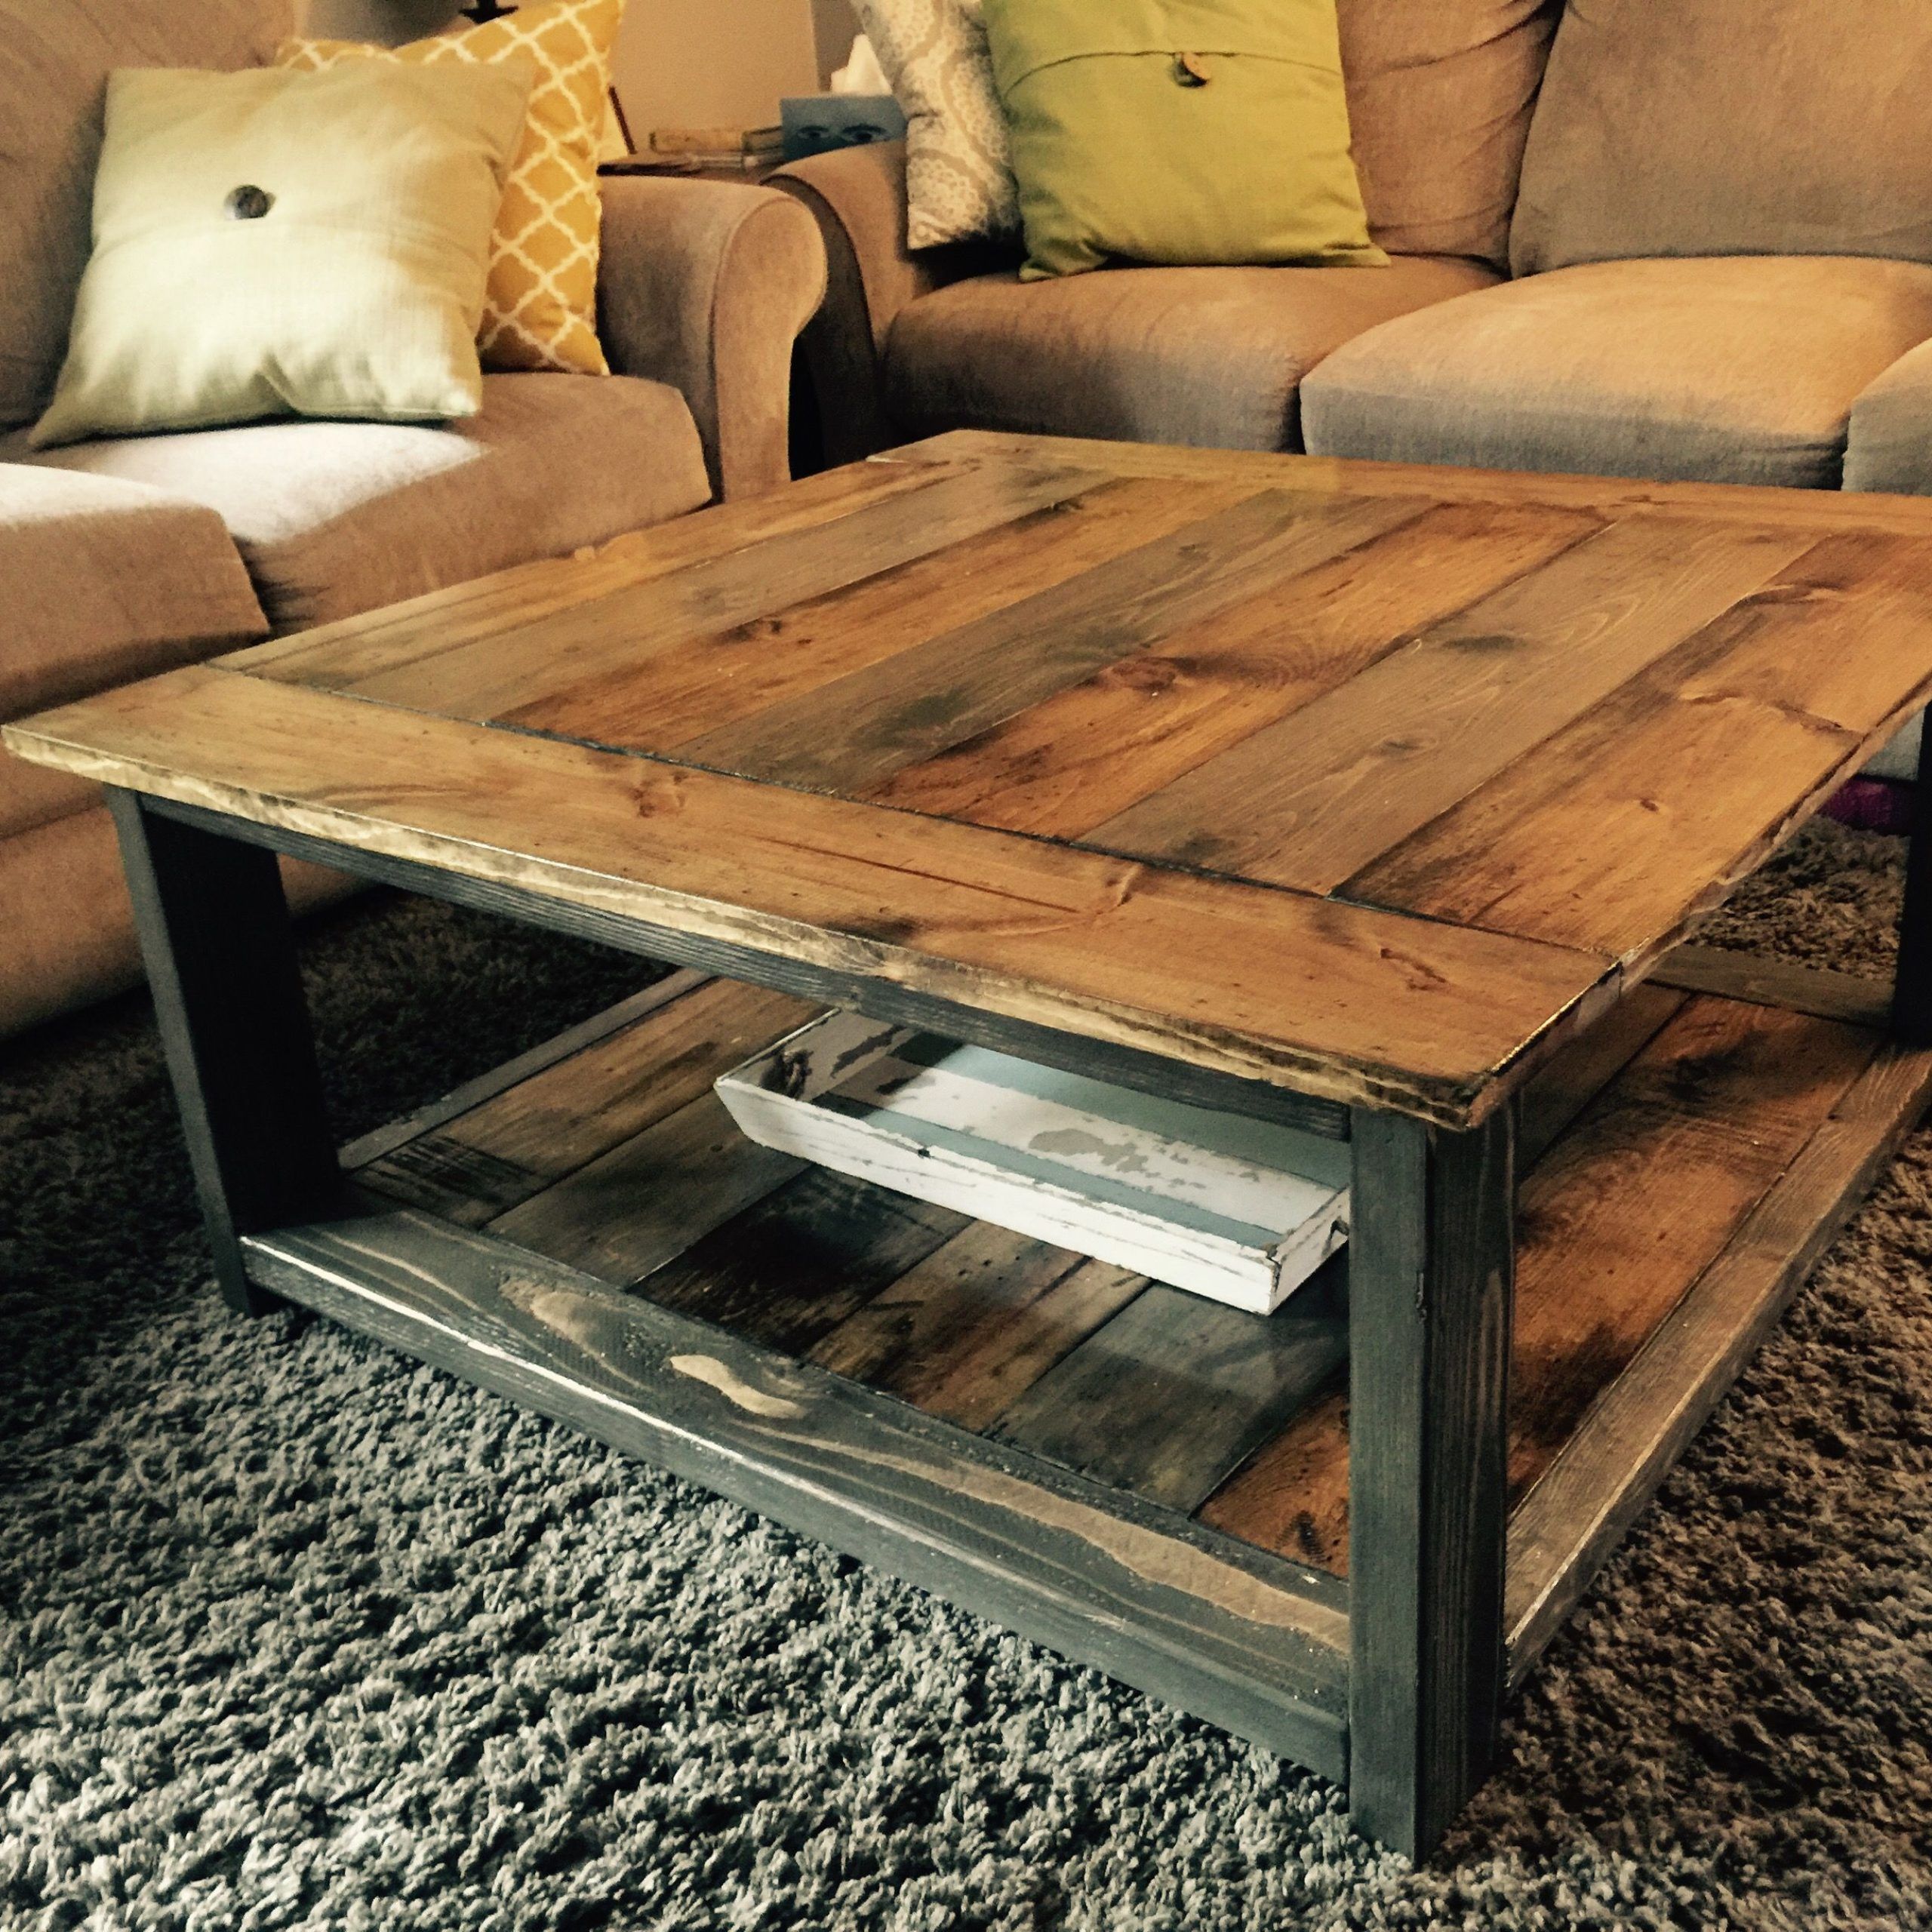 Homemade Rustic Coffee Table – Diy Rustic X Coffee Table (plansana Intended For Rustic Coffee Tables (View 17 of 20)